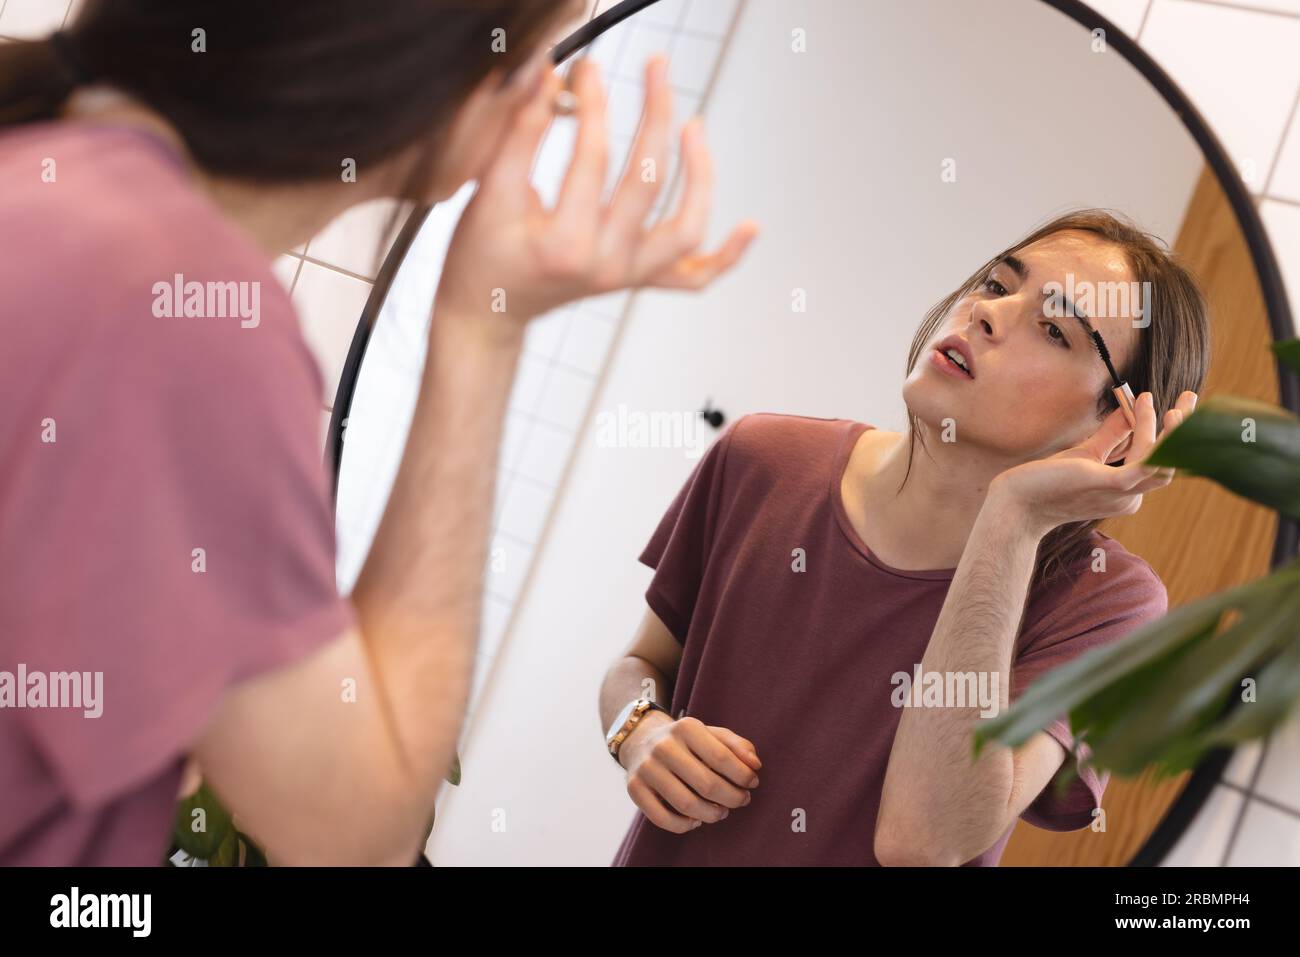 Non-binary transgender woman applying eyebrow makeup looking in bathroom mirror at home. Gender fluidity, health, beauty and lifestyle. Stock Photo